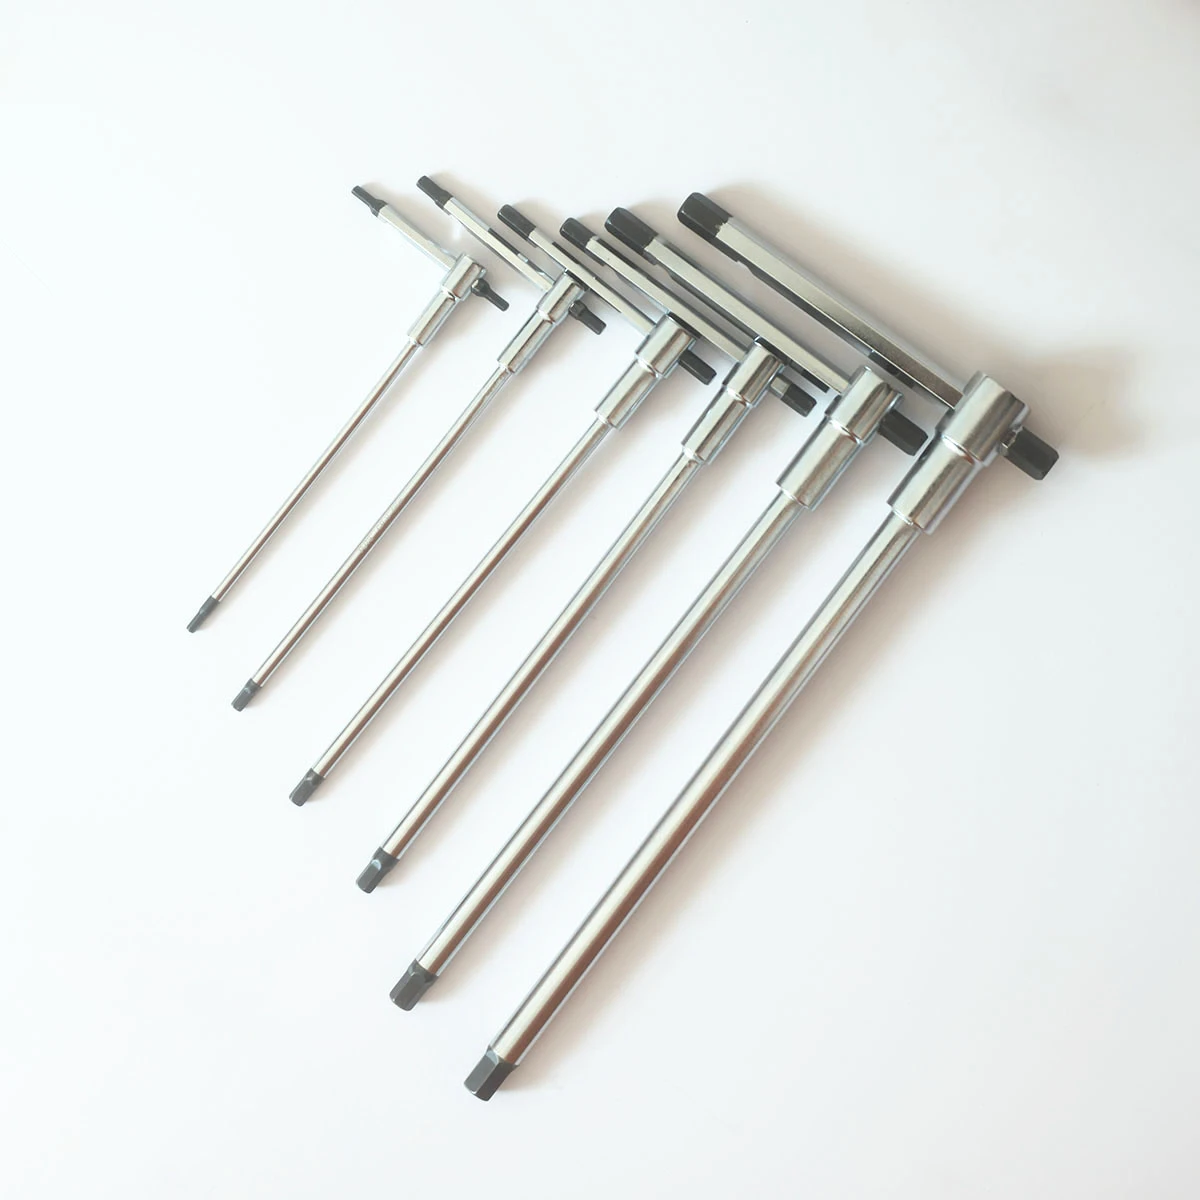 T-Slide Allen Wrench CR-V High Hardness Alloy Steel Multifunctional Repair Tool Parts